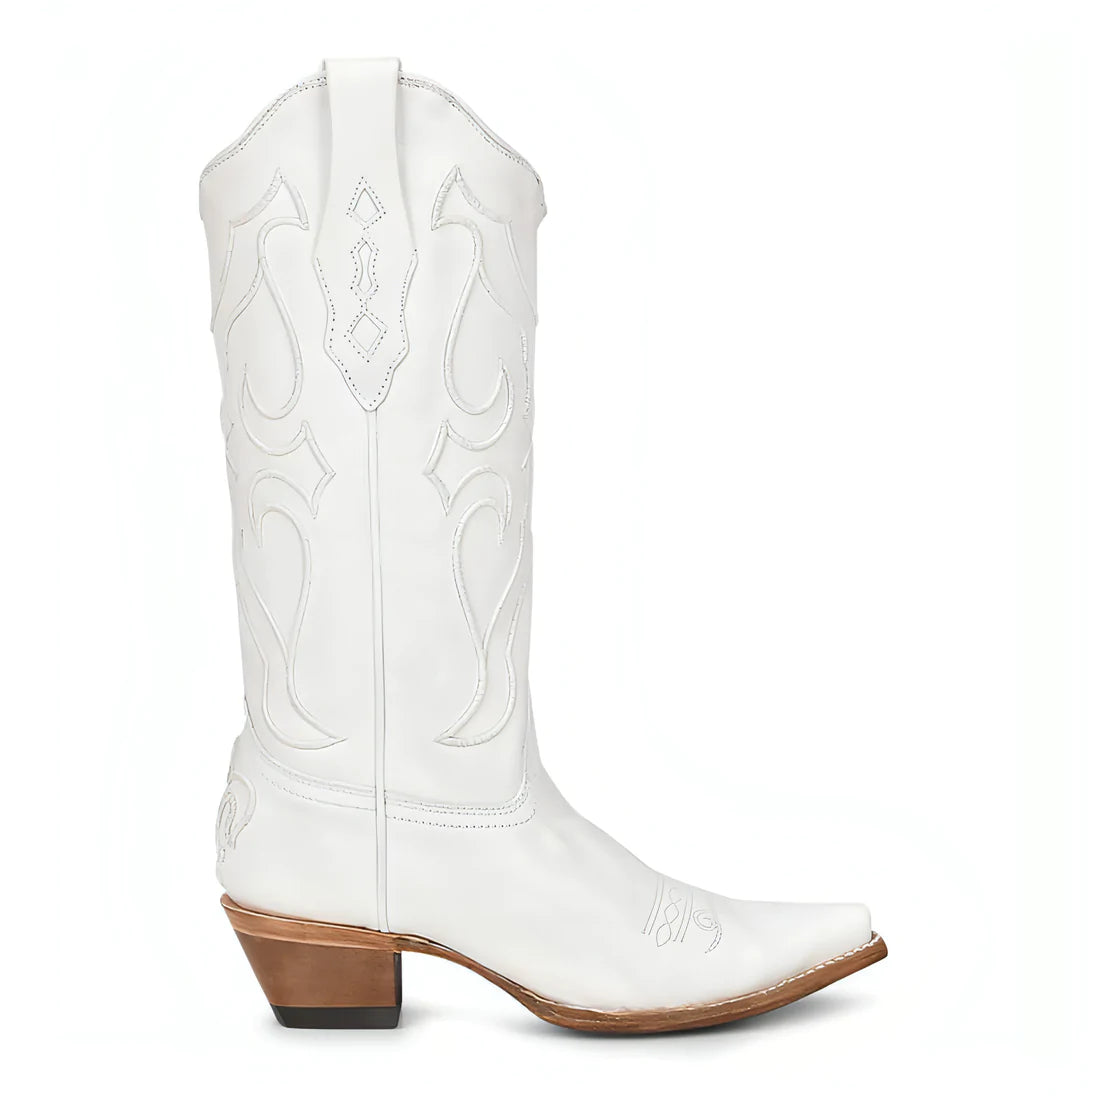 The Pearly White Boots